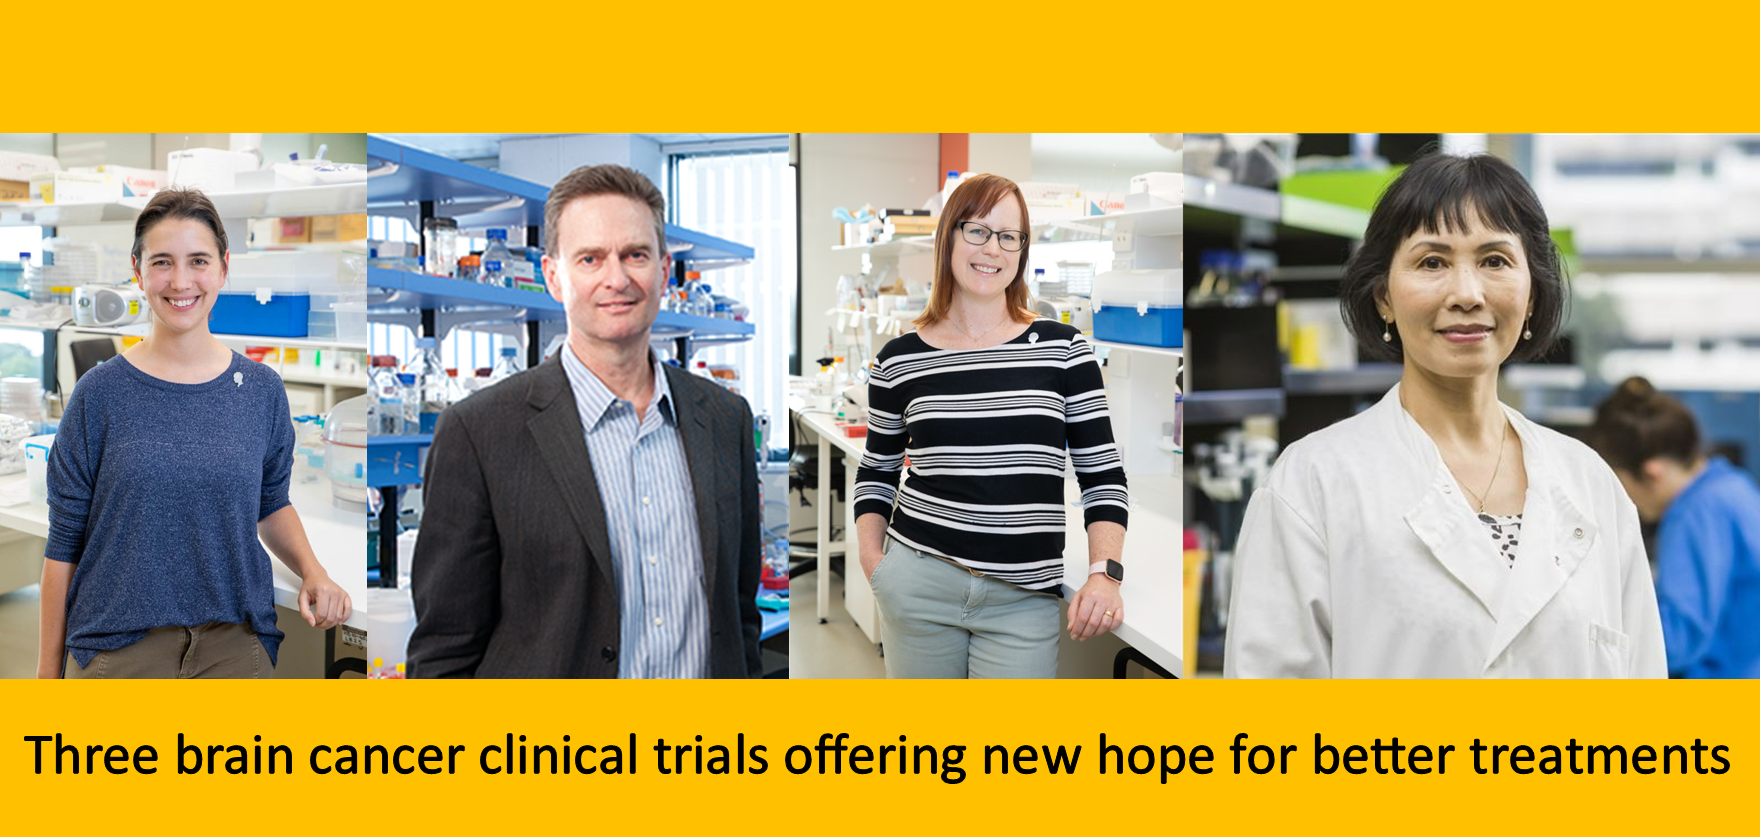 Three brain cancer clinical trials offering new hope for better treatments image